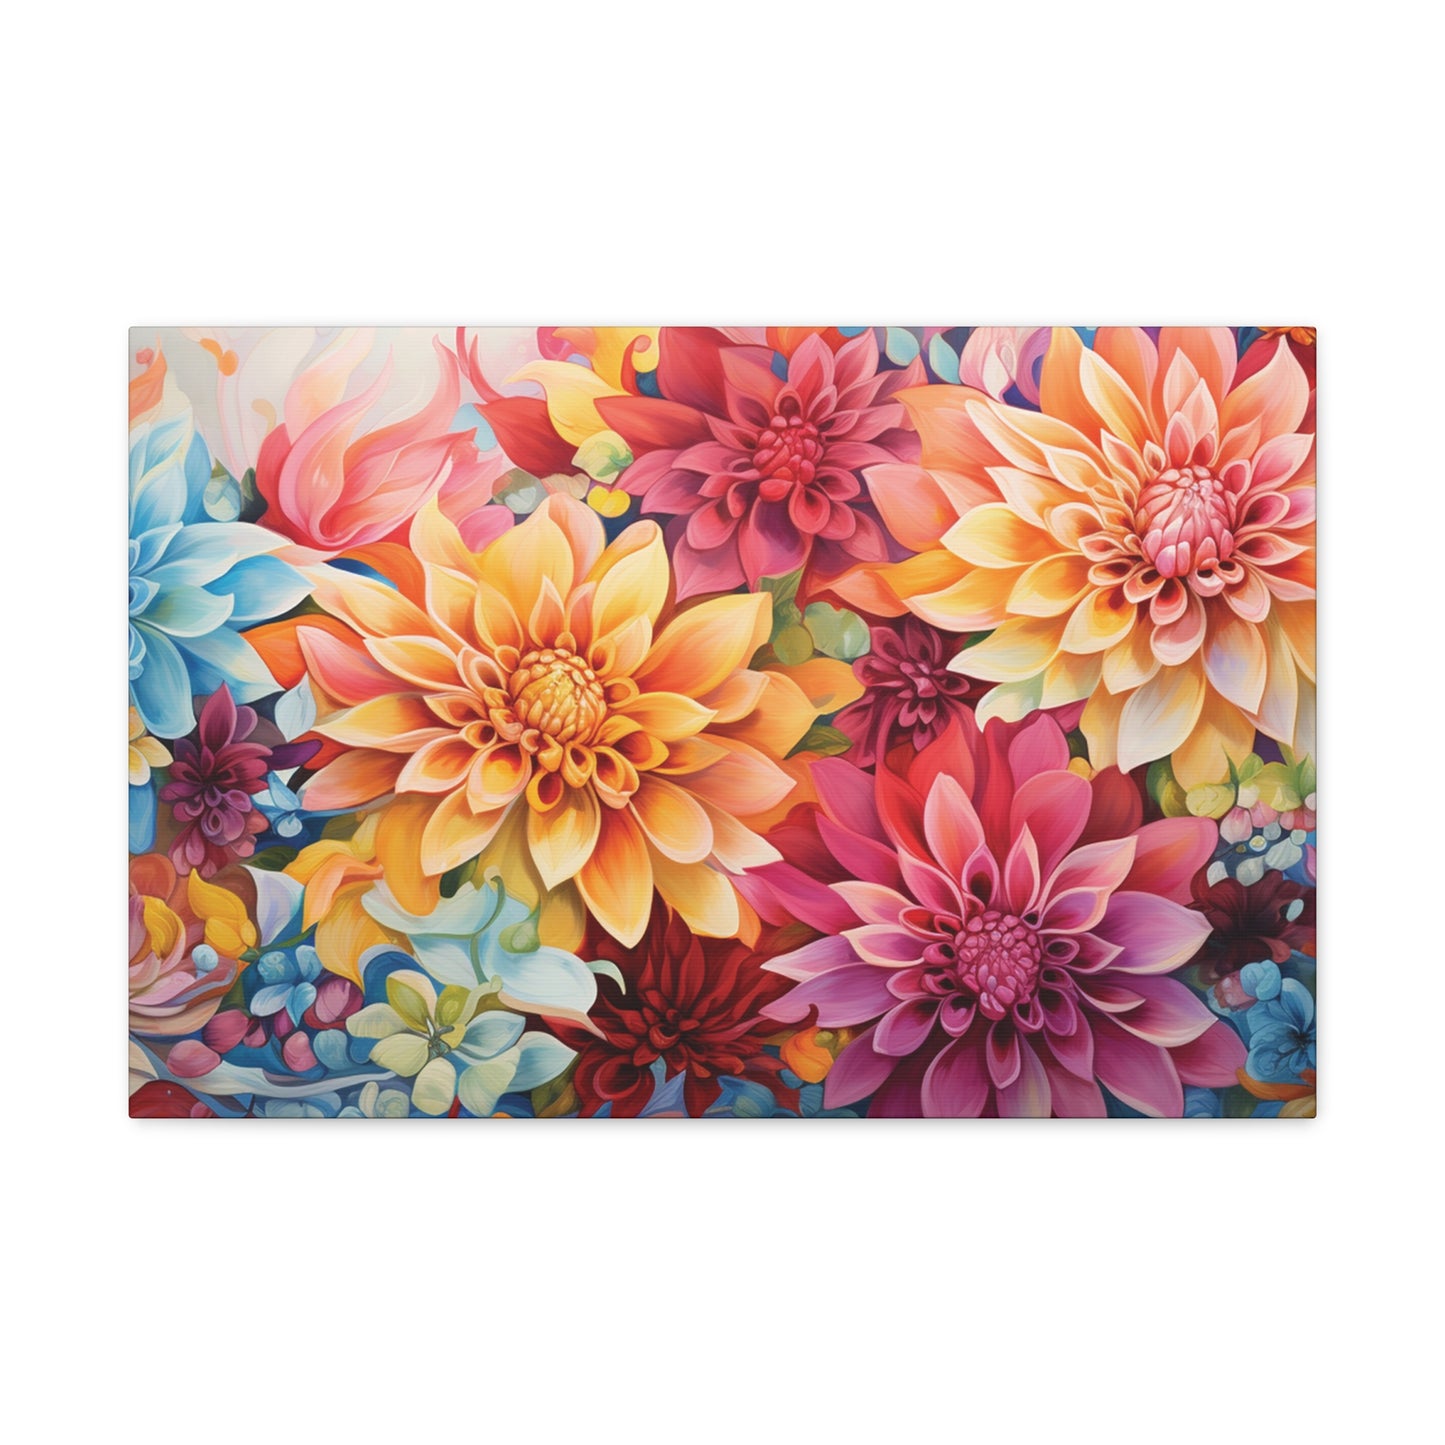 Floral Abstract Gallery Wrap